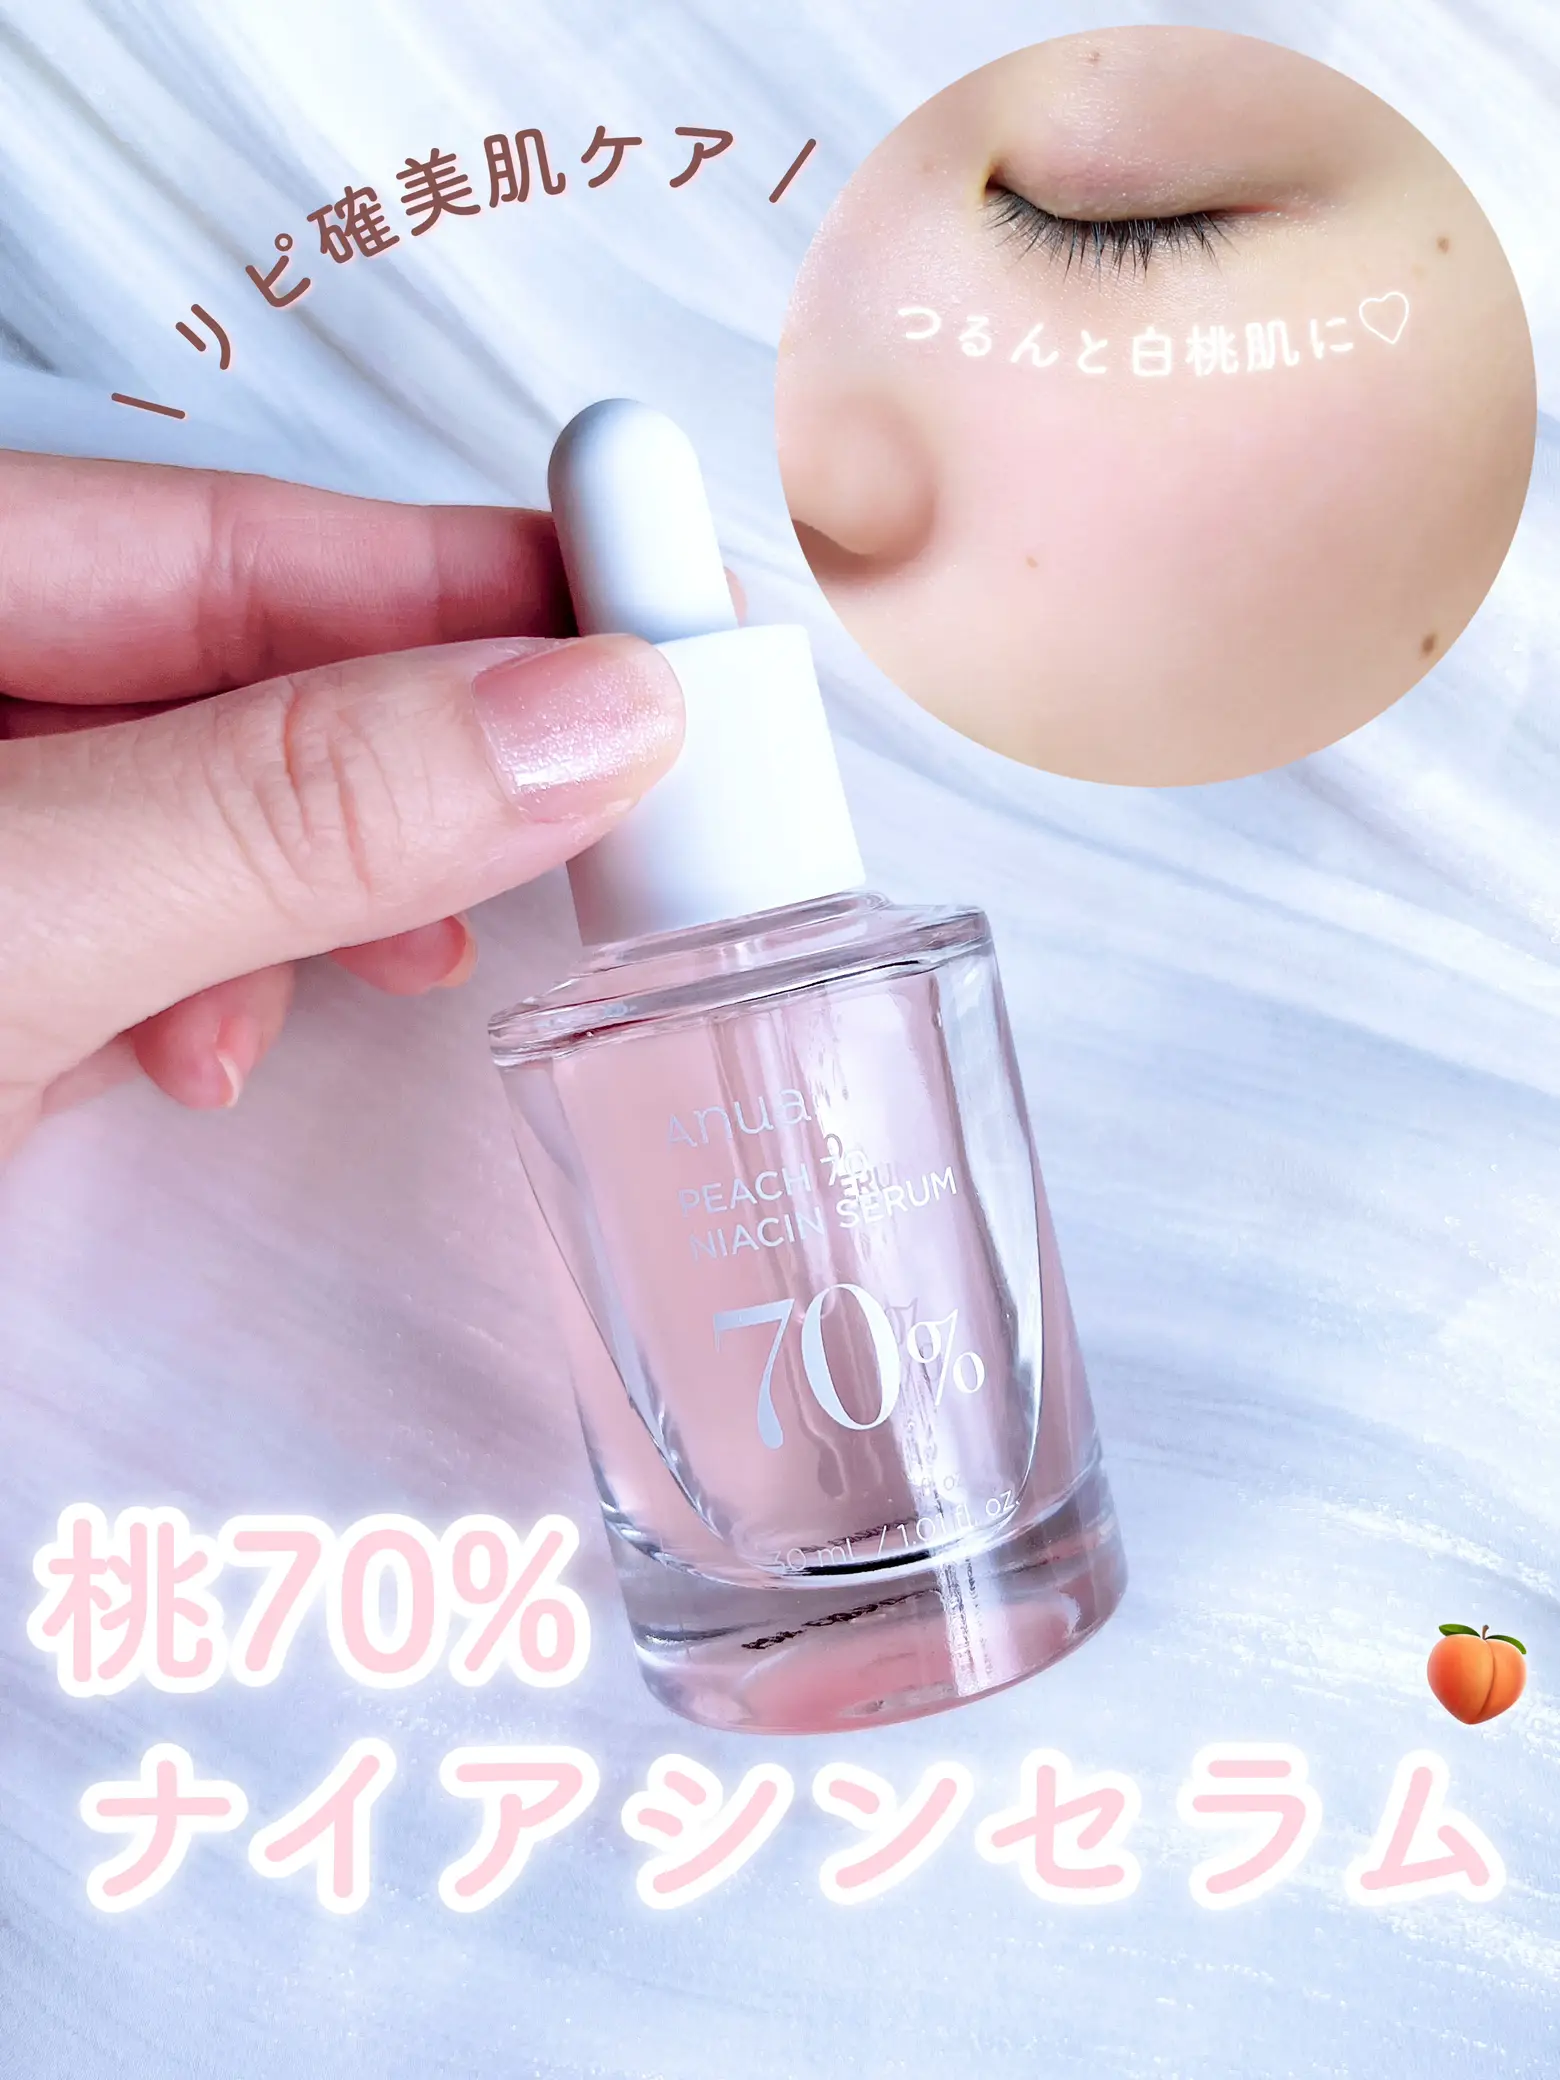 Peach and lily glass skin serum  Gallery posted by Safna Suhood